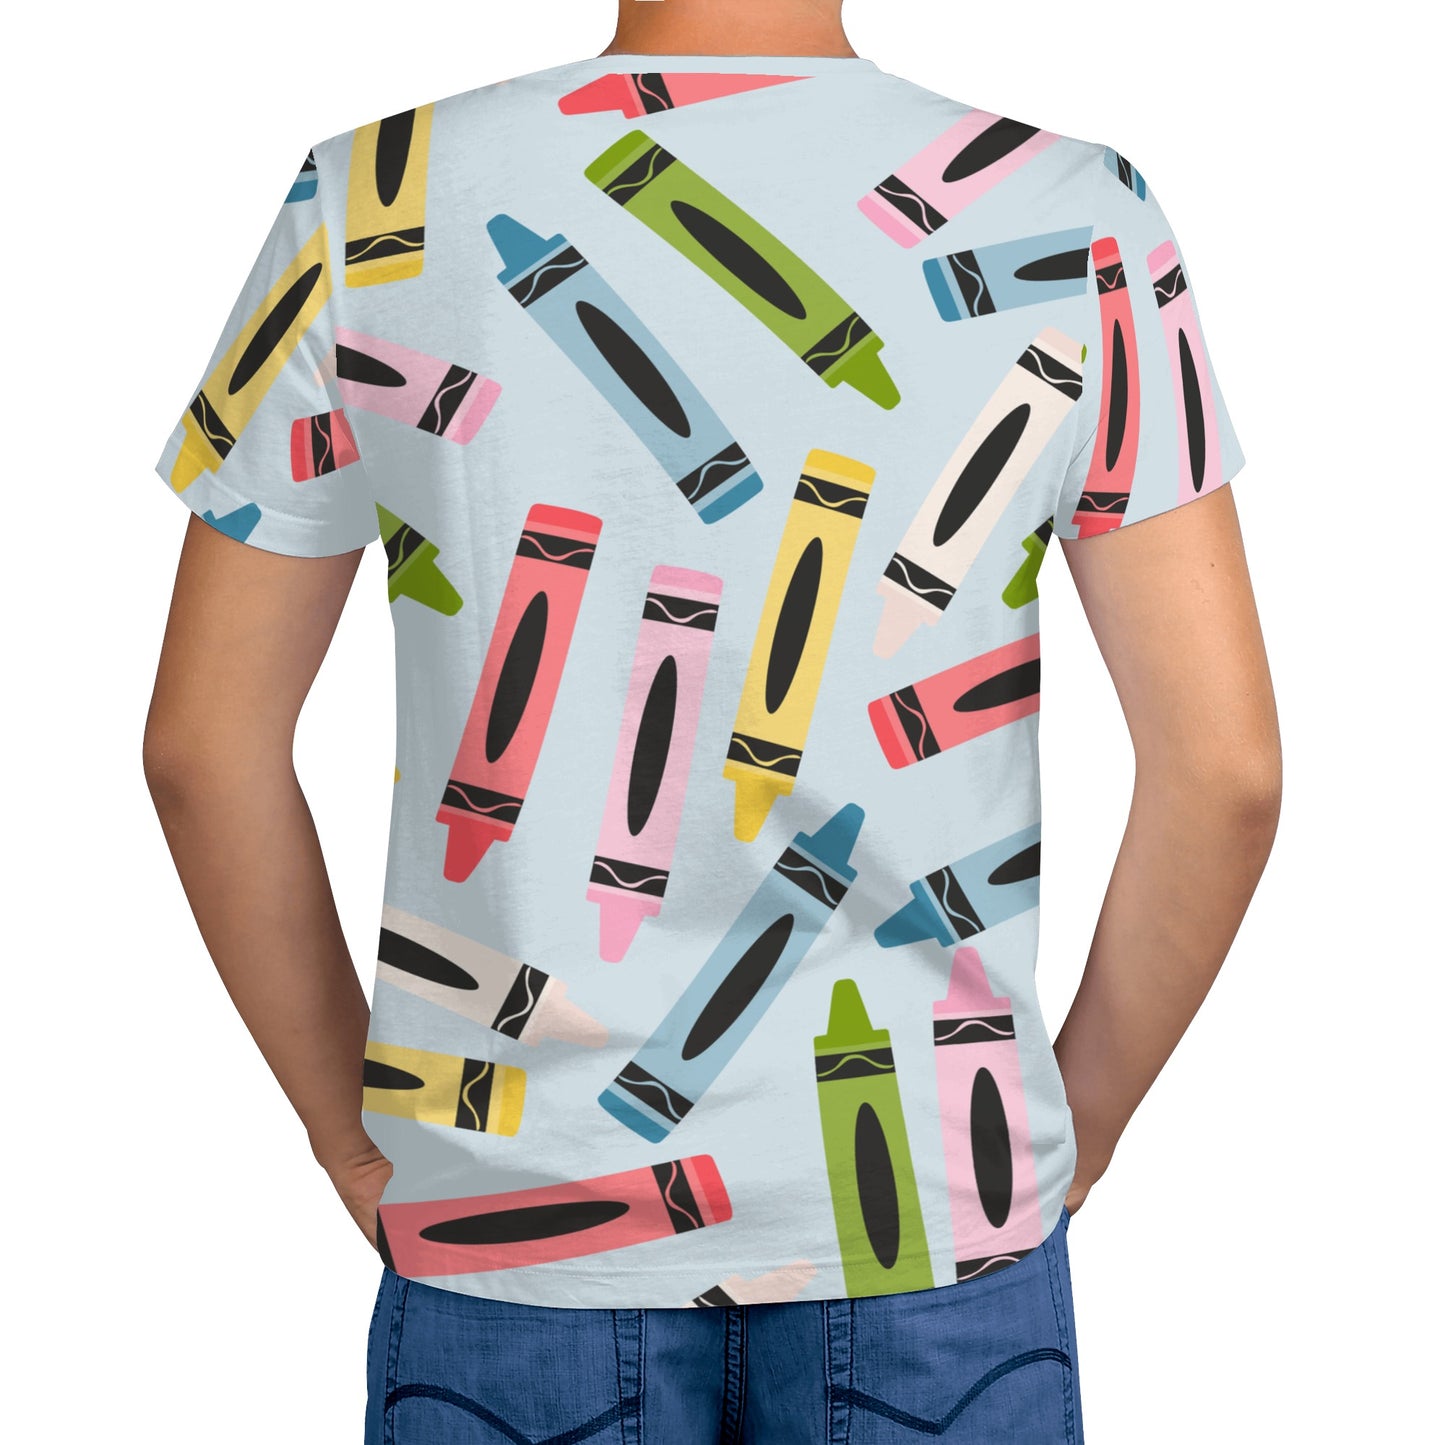 Cute Crayons Graphic Tee